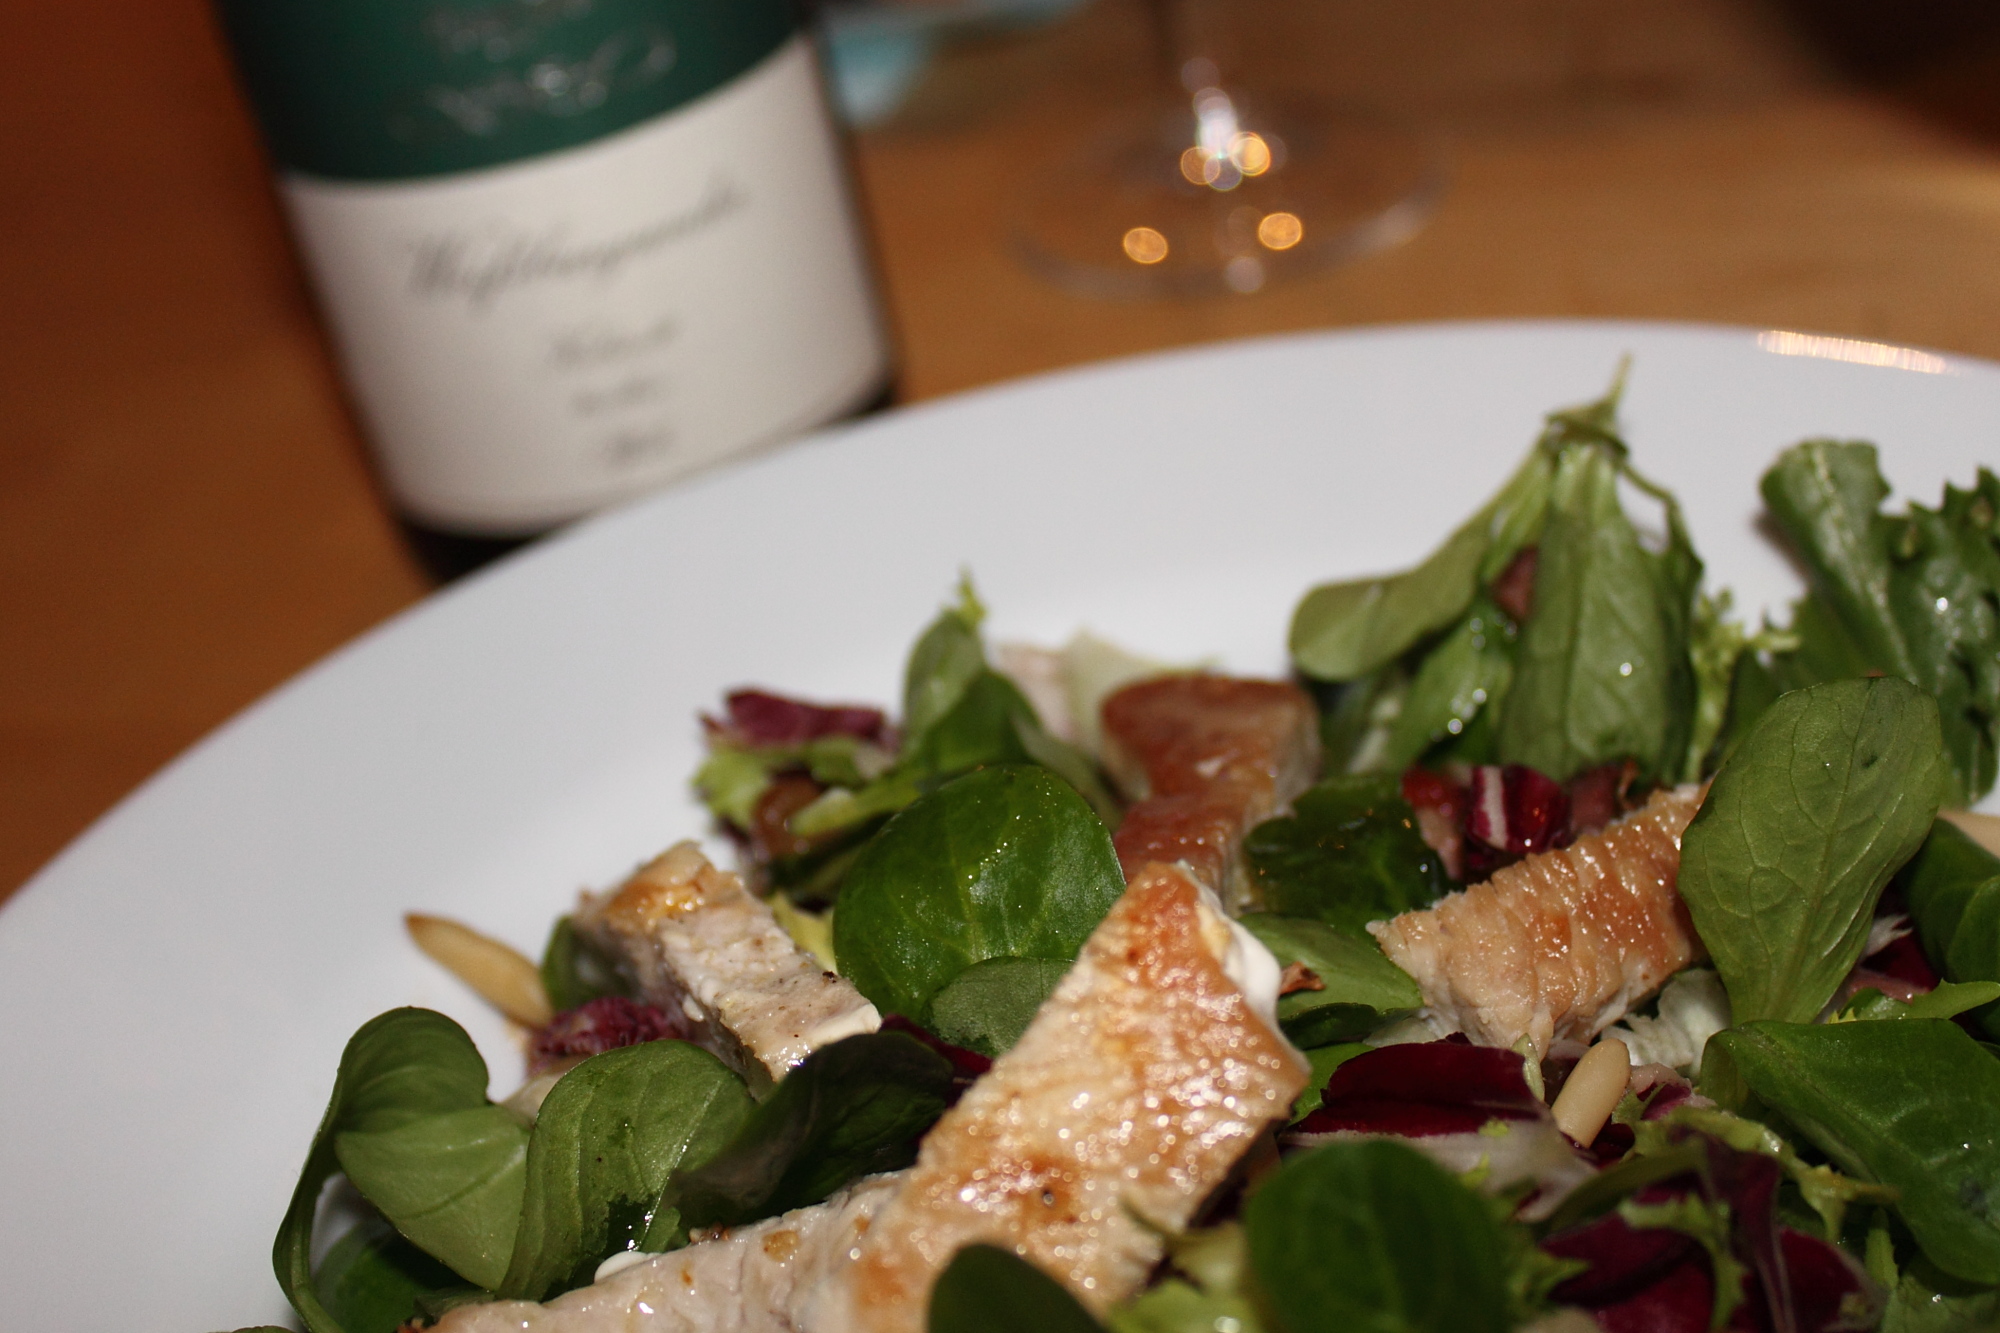  At your service, salad! Pinot Blanc, the discreet background companion